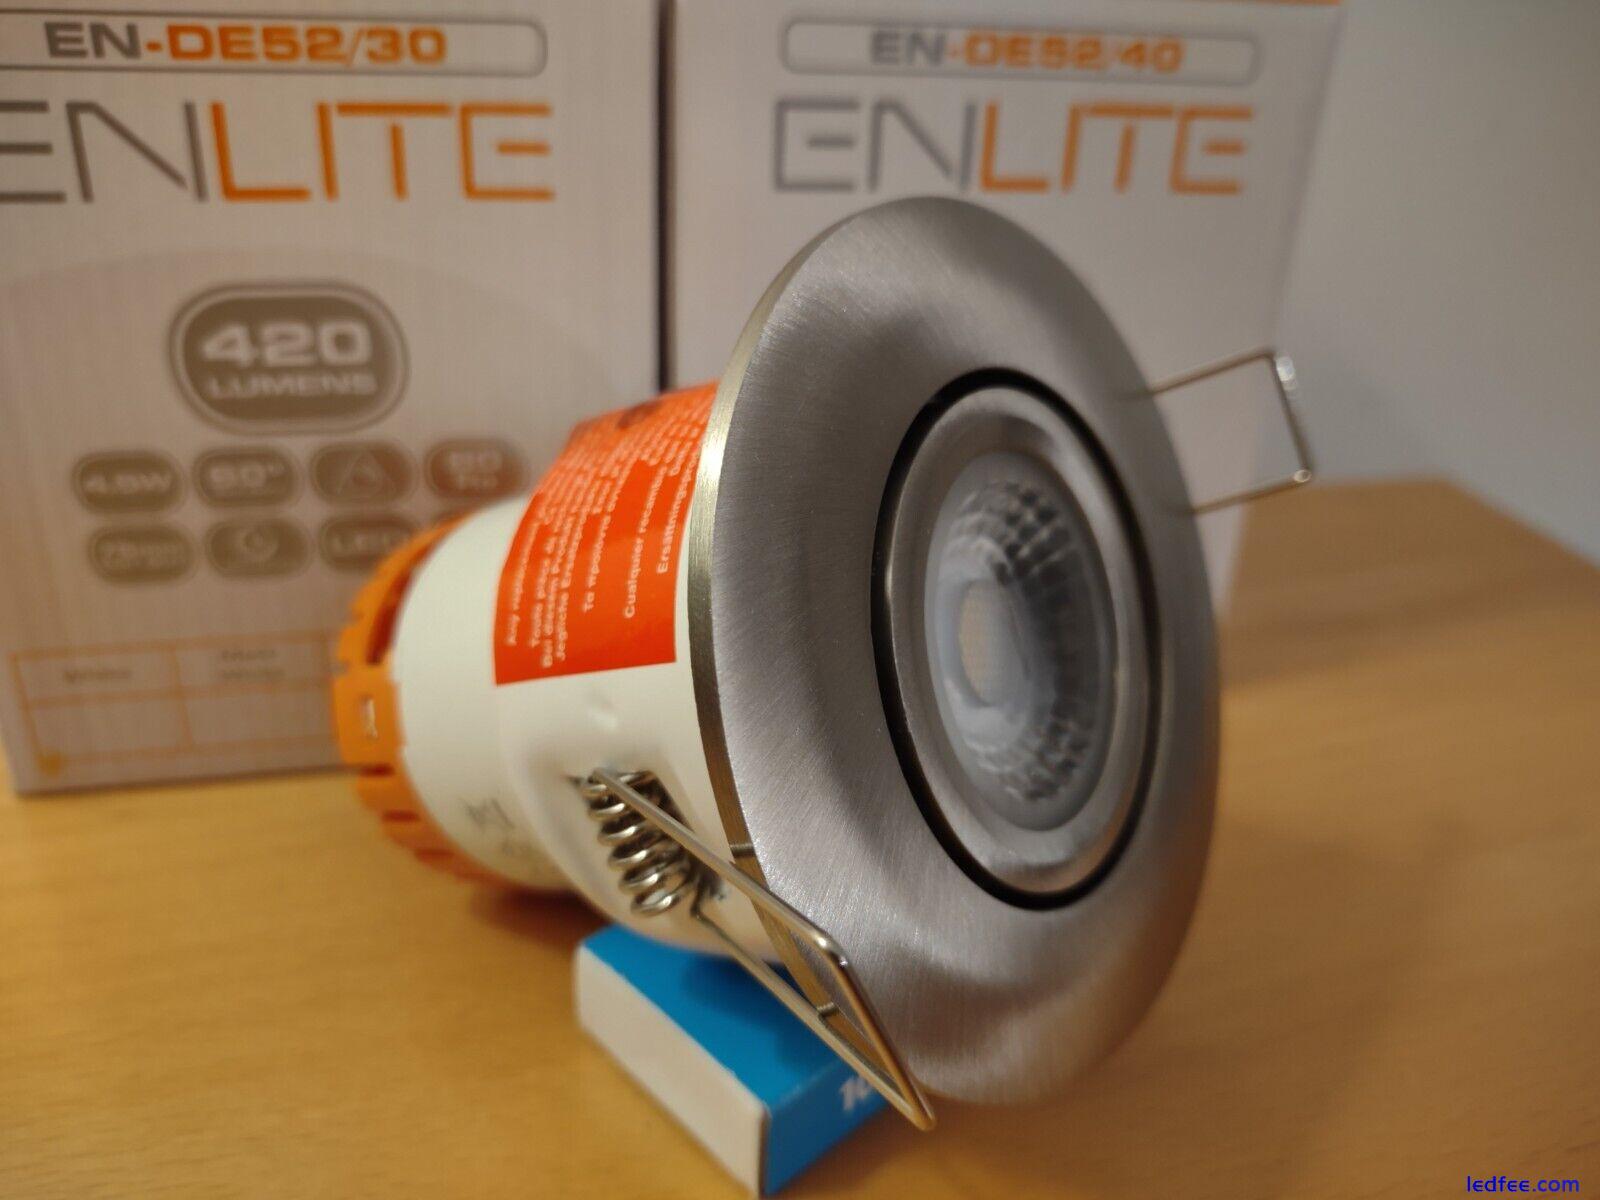 LED Downlight Enlite 4 . 5w Nickel 3000k Warm White Ceiling Spot Fire Rated 2 